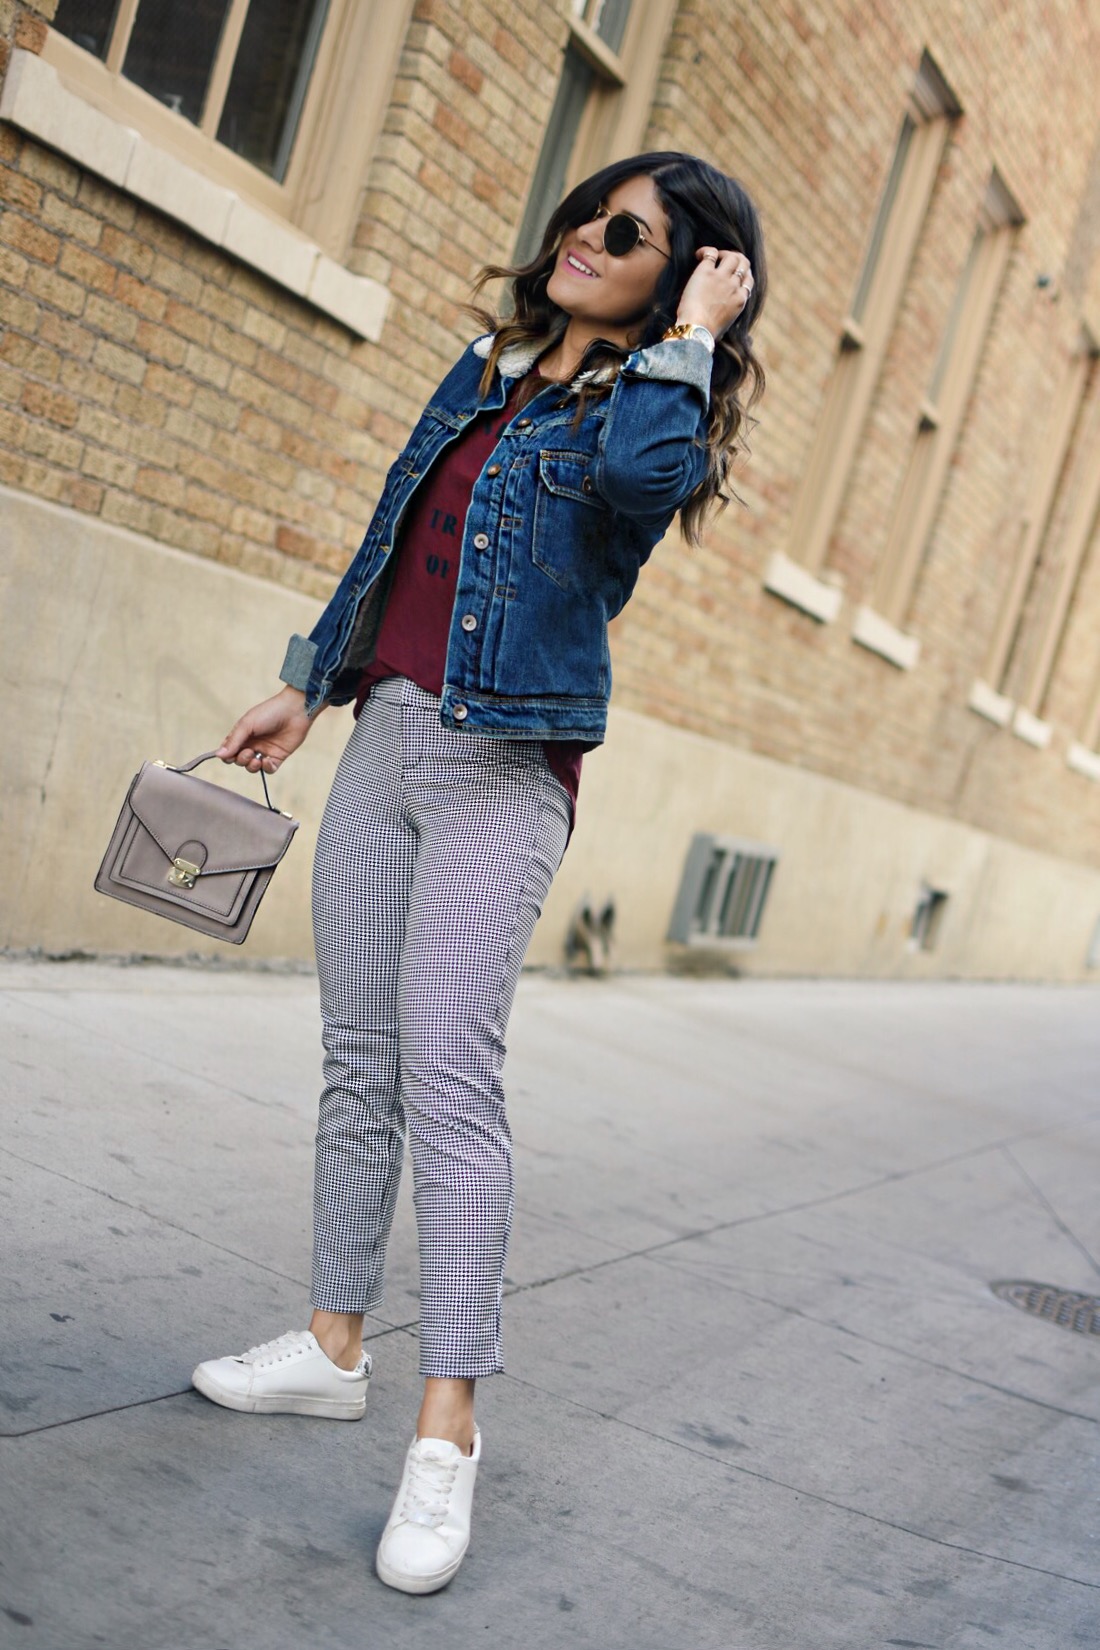 Carolina Hellal of Chic Talk wearing an Old navy burgundy T, denim jacket, printed pinxie pants, and Rayban rounded sunglasses - OLD NAVY TEE COLLECTION by popular Denver fashion blogger Chic Talk